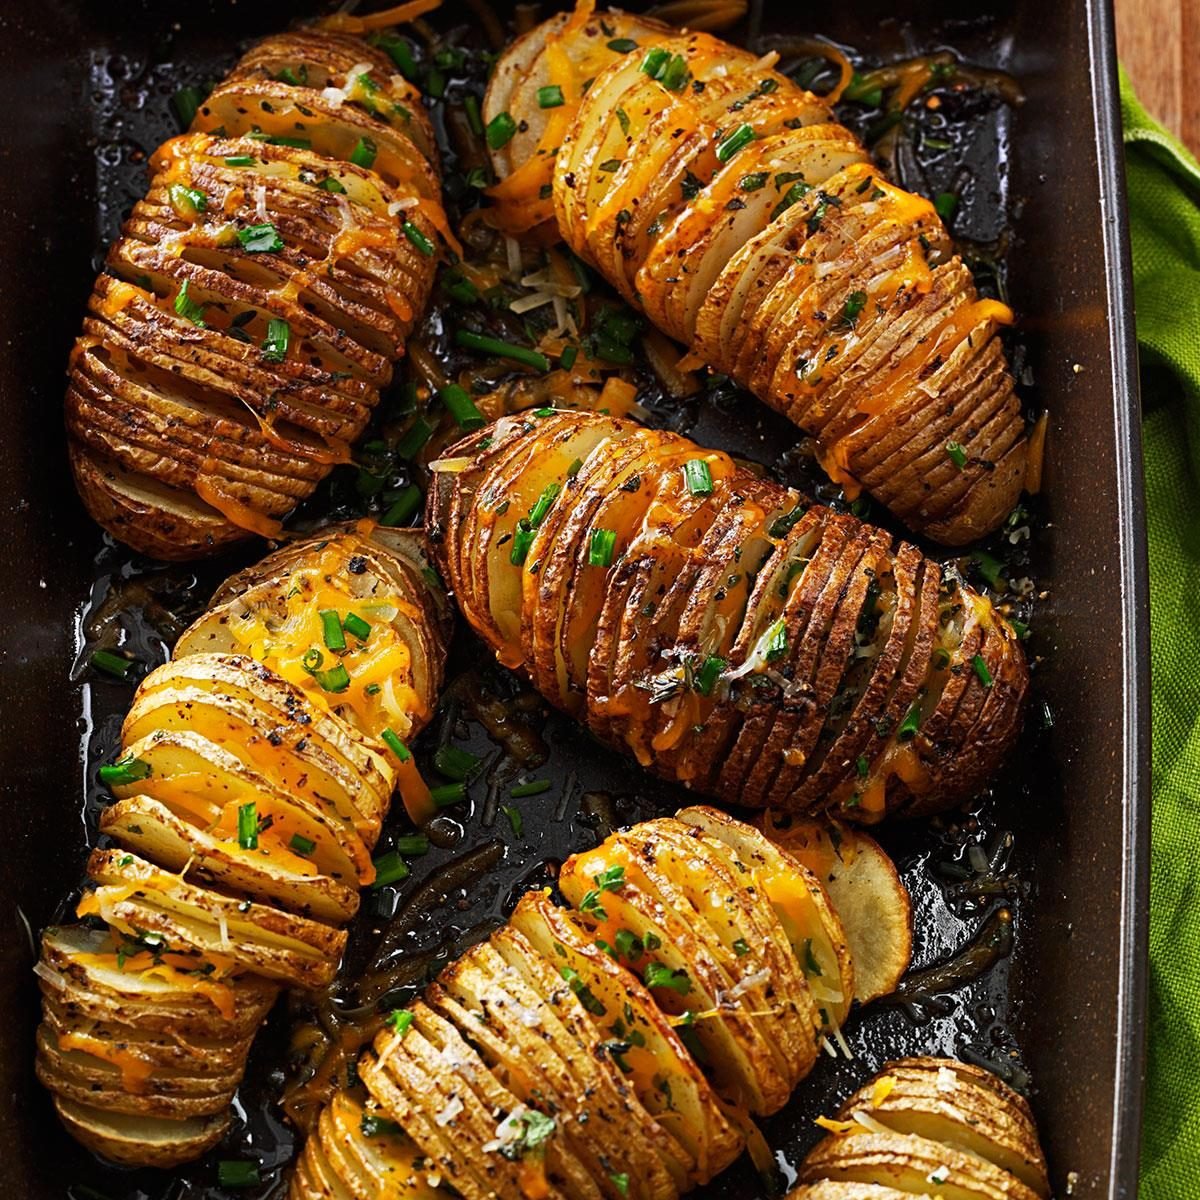 16 Types of Potatoes and Best Ways to Cook Them